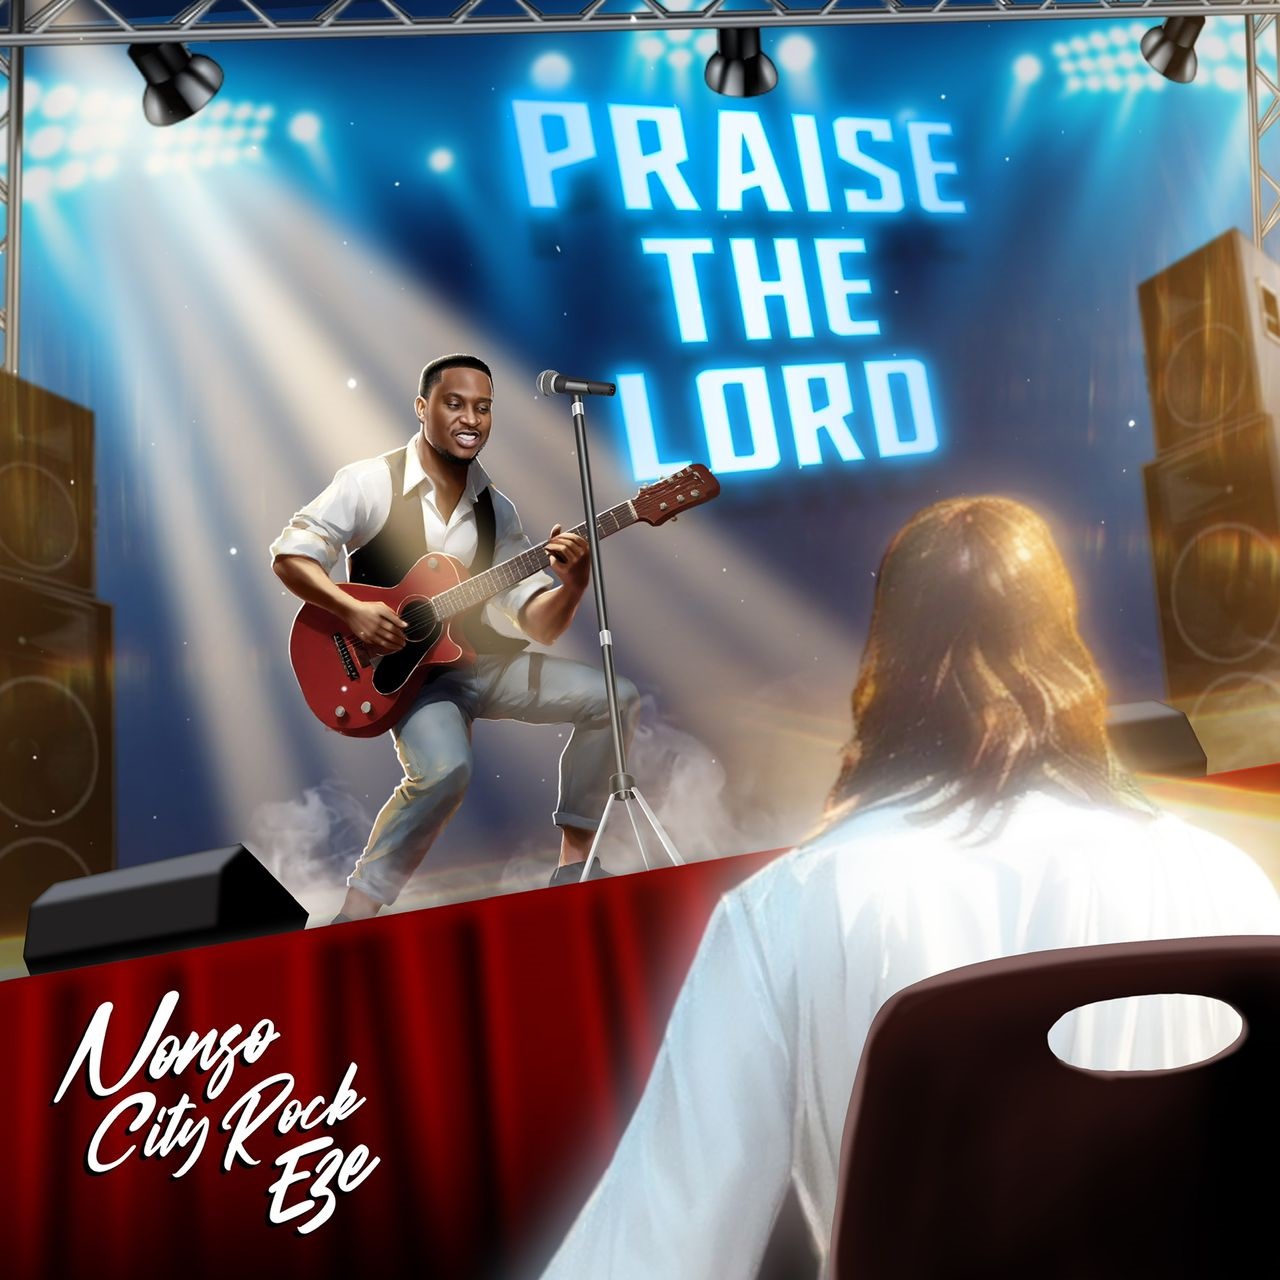 nonso-“cityrock”-eze-drops-new-single-to-“praise-the-lord”